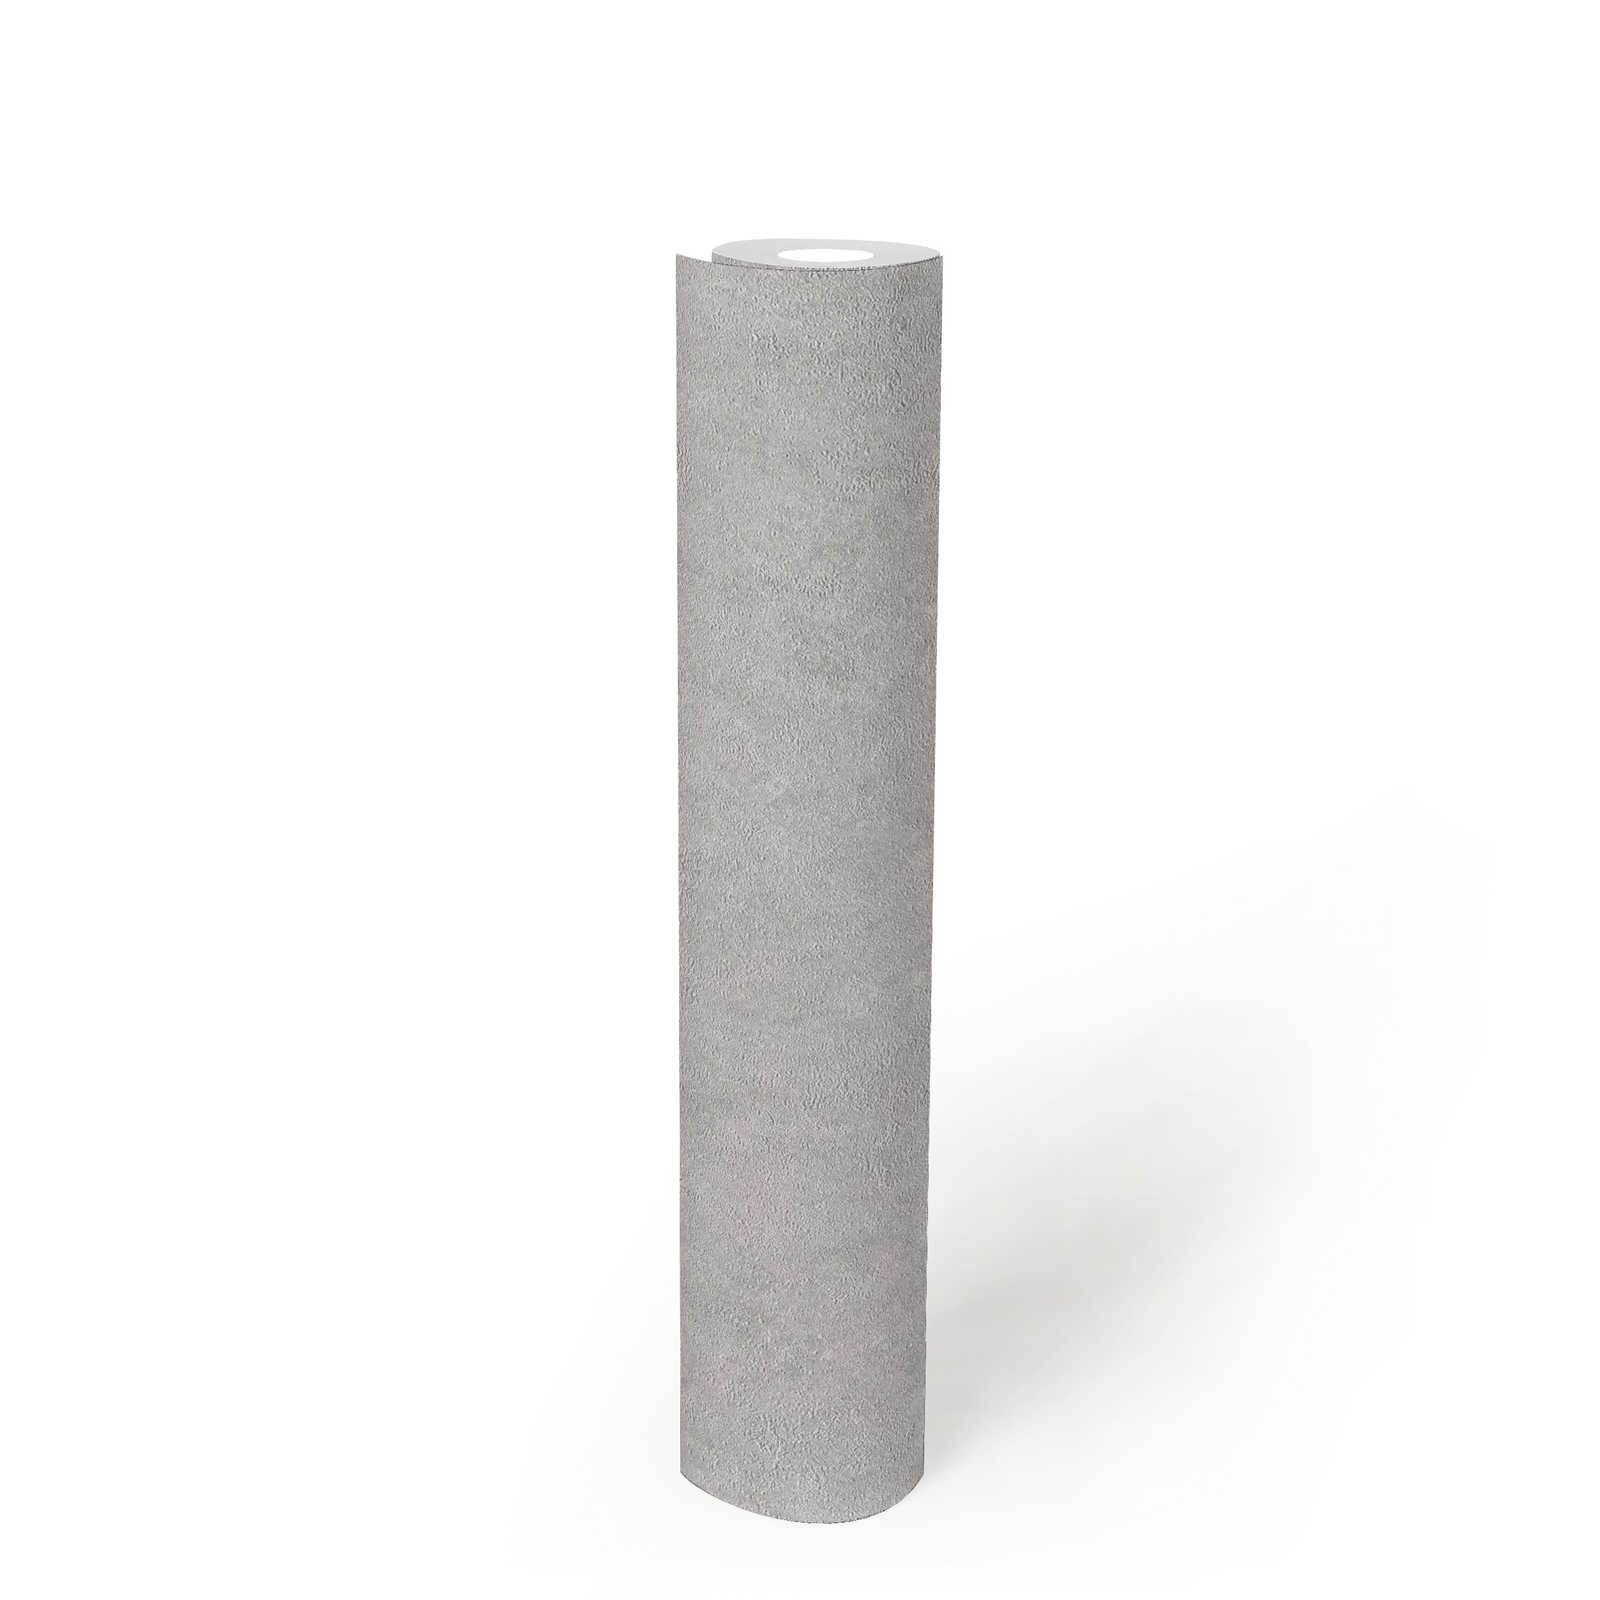             Plain textured wallpaper glossy with metallic effect - grey, silver
        